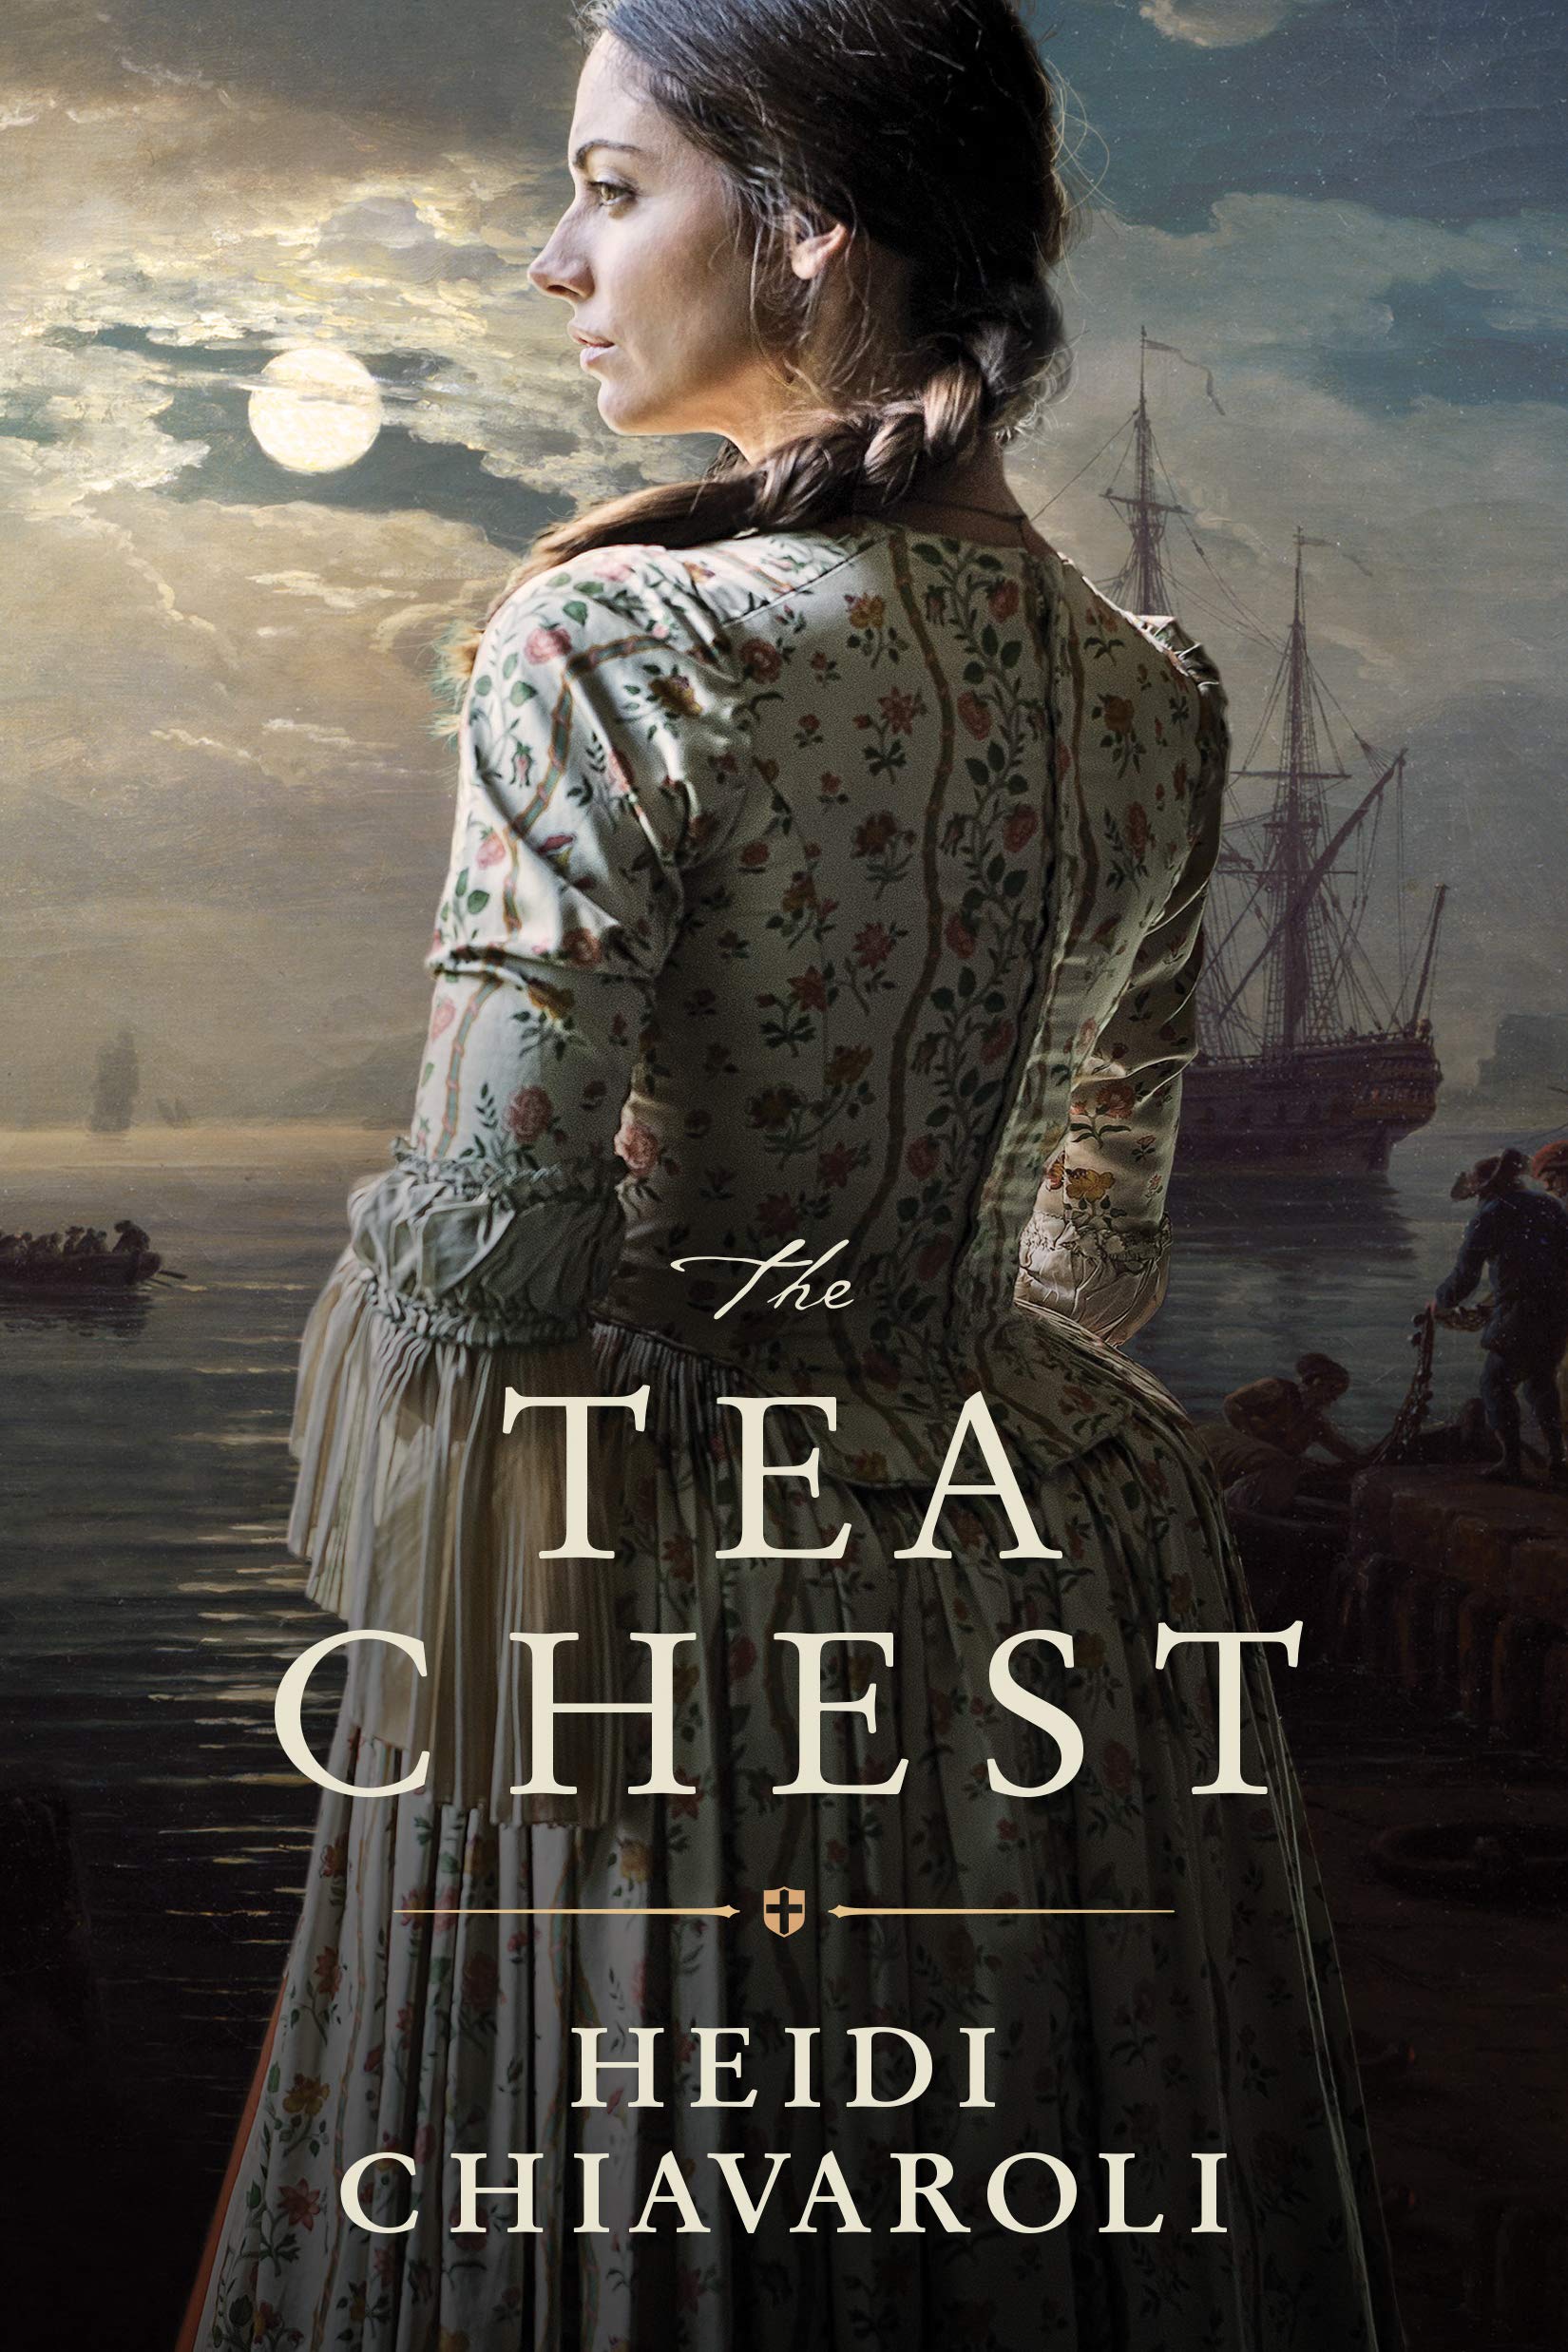 Image for "The Tea Chest"